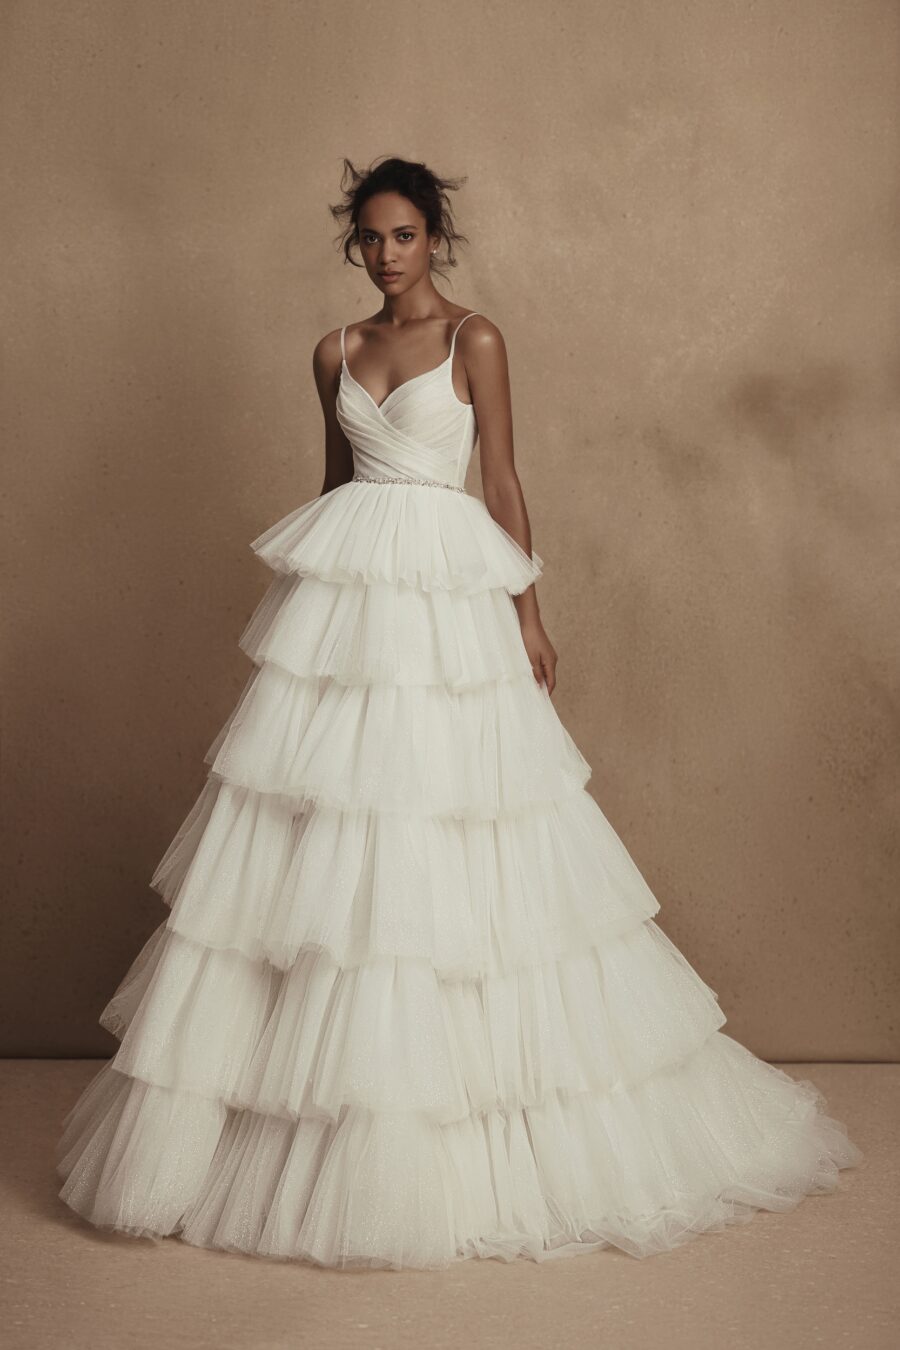 Mercy 3 wedding dress by woná concept from personality collection